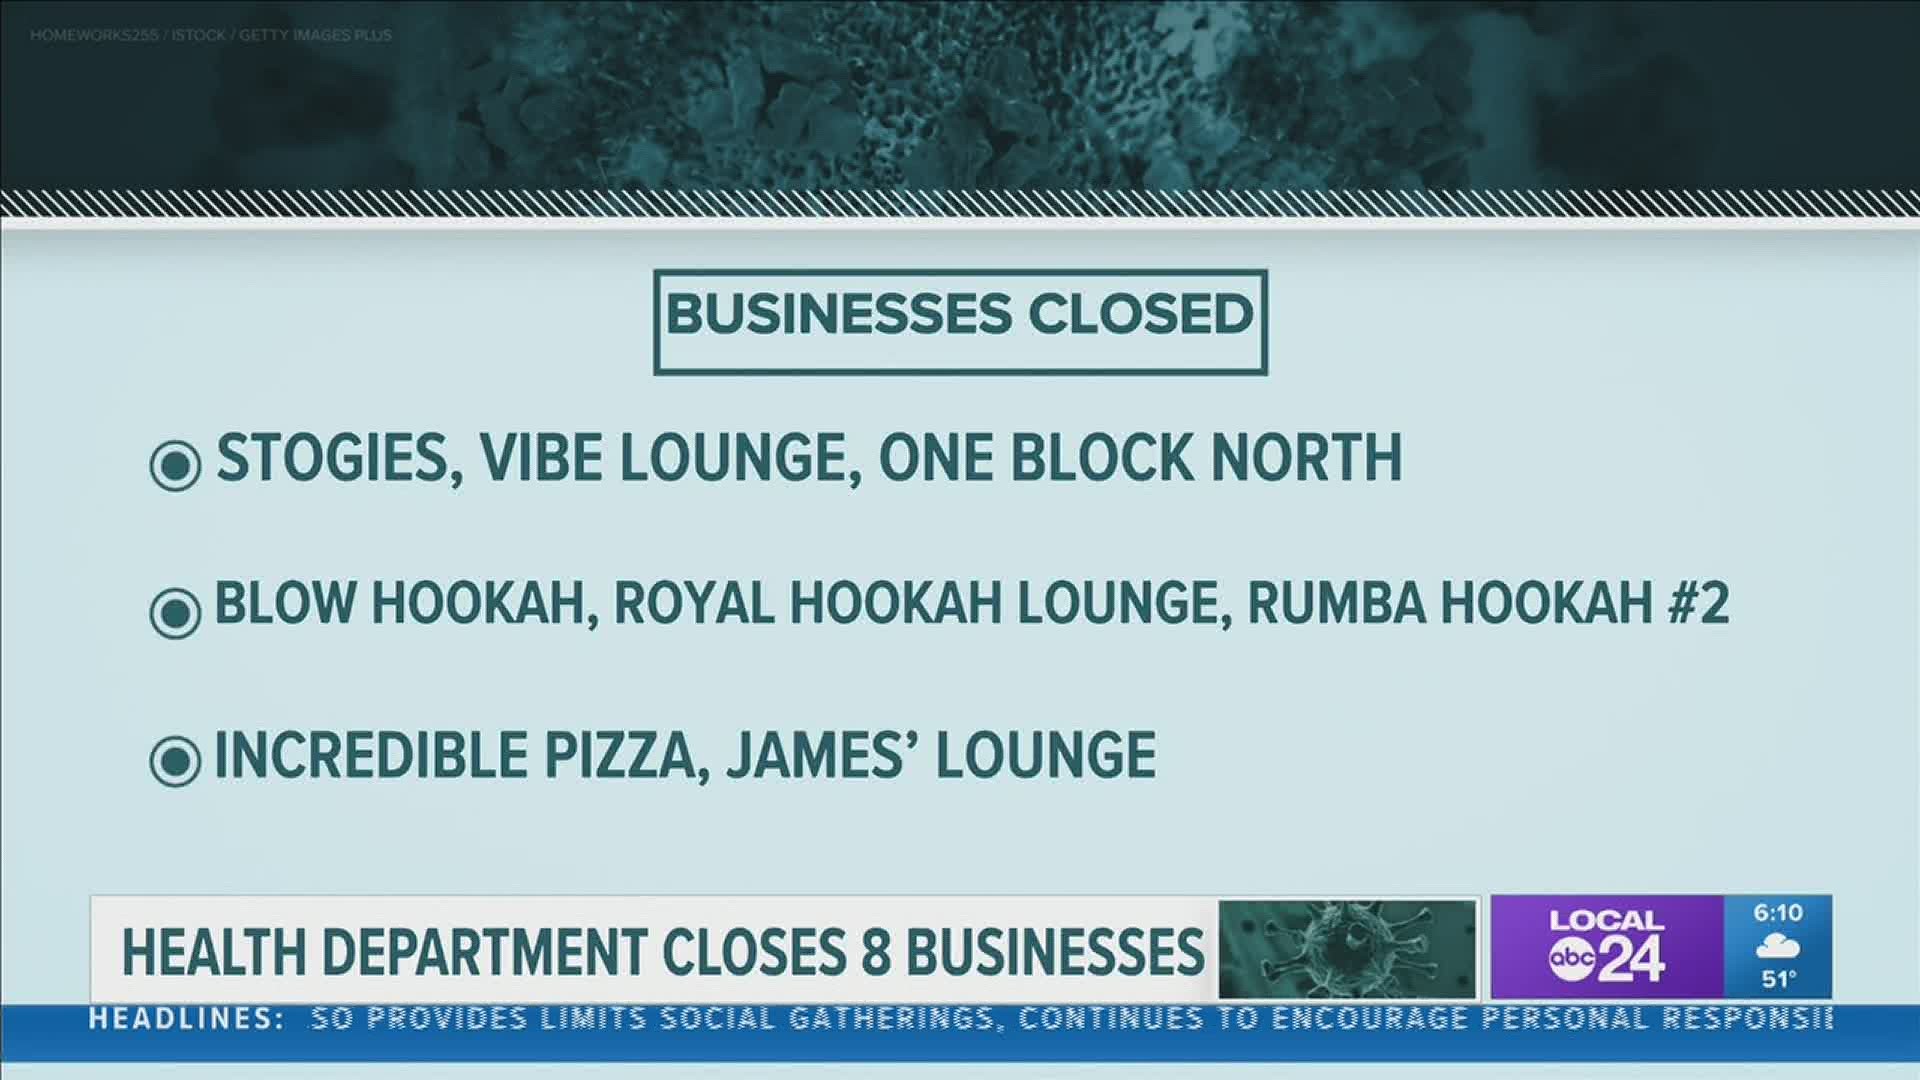 After inspections over the weekend, eight businesses have been closed due to violations to Health Directive 16.